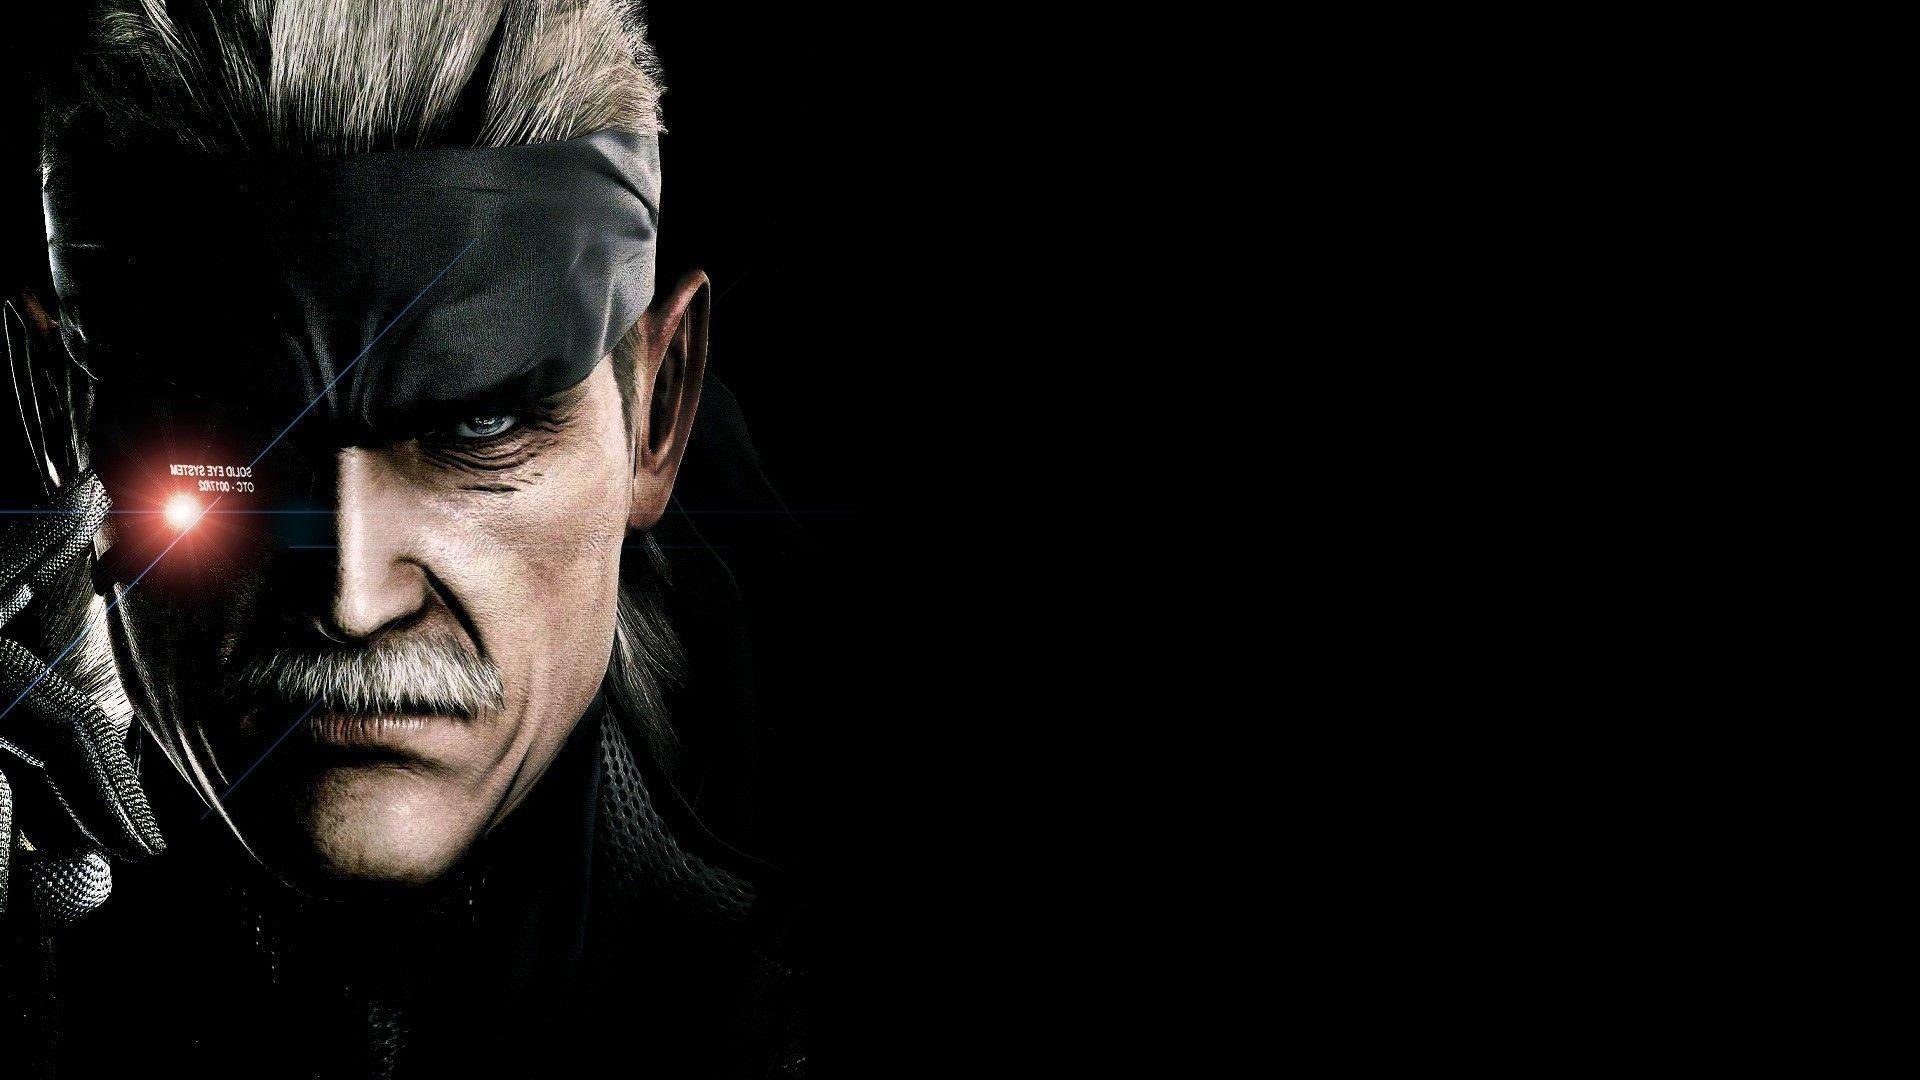 image For > Solid Snake Wallpaper Mgs4